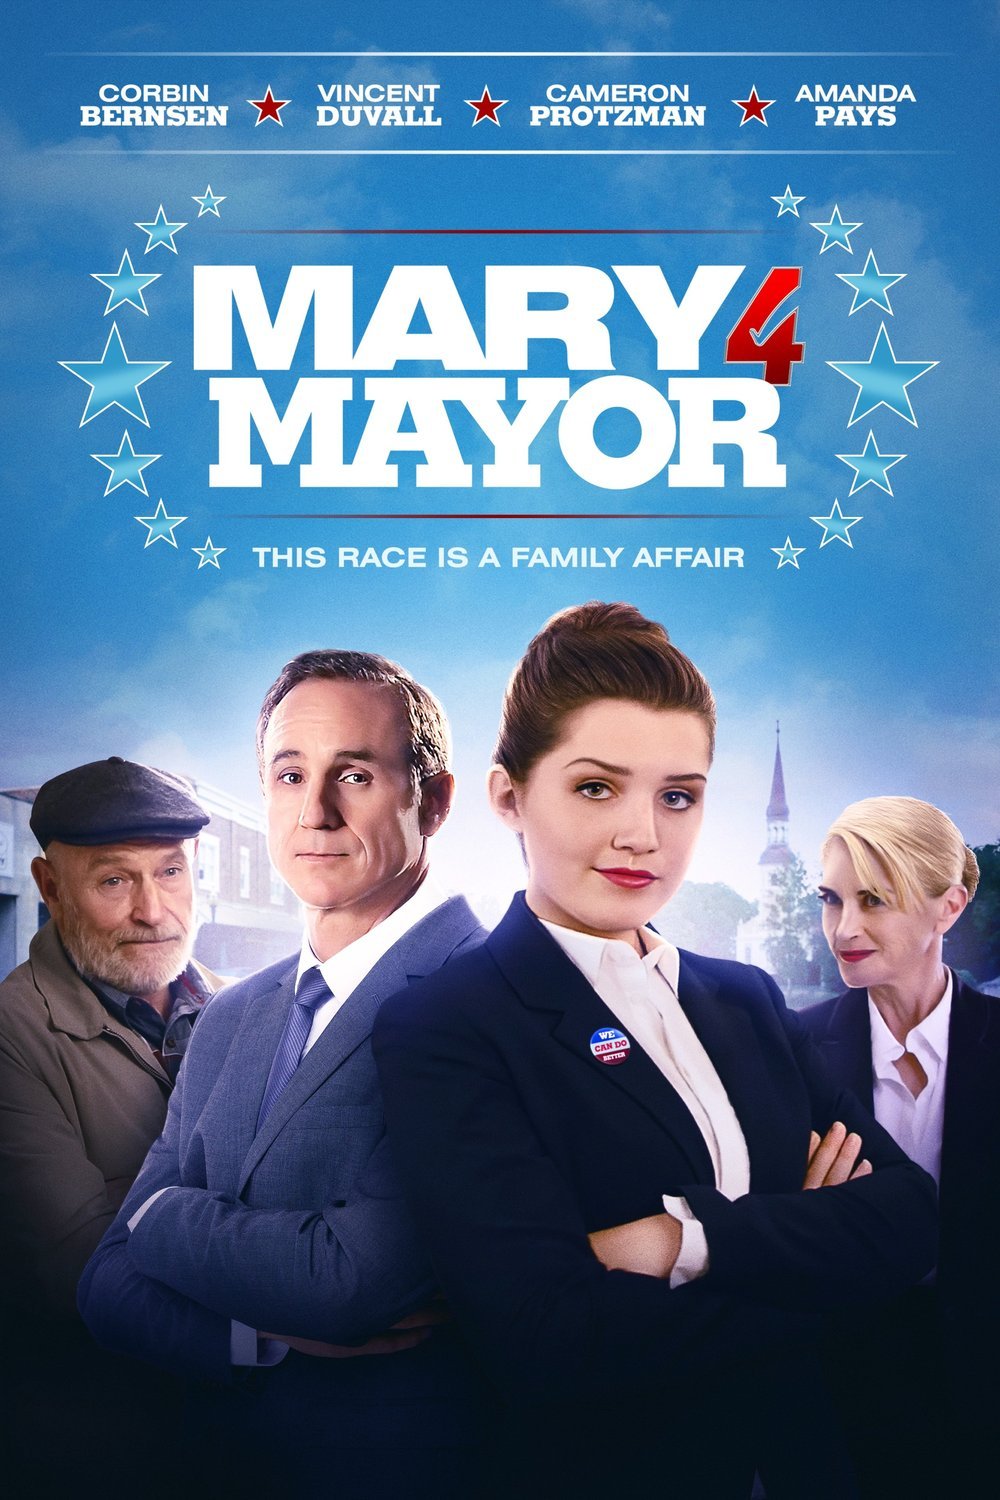 Poster of the movie Mary for Mayor